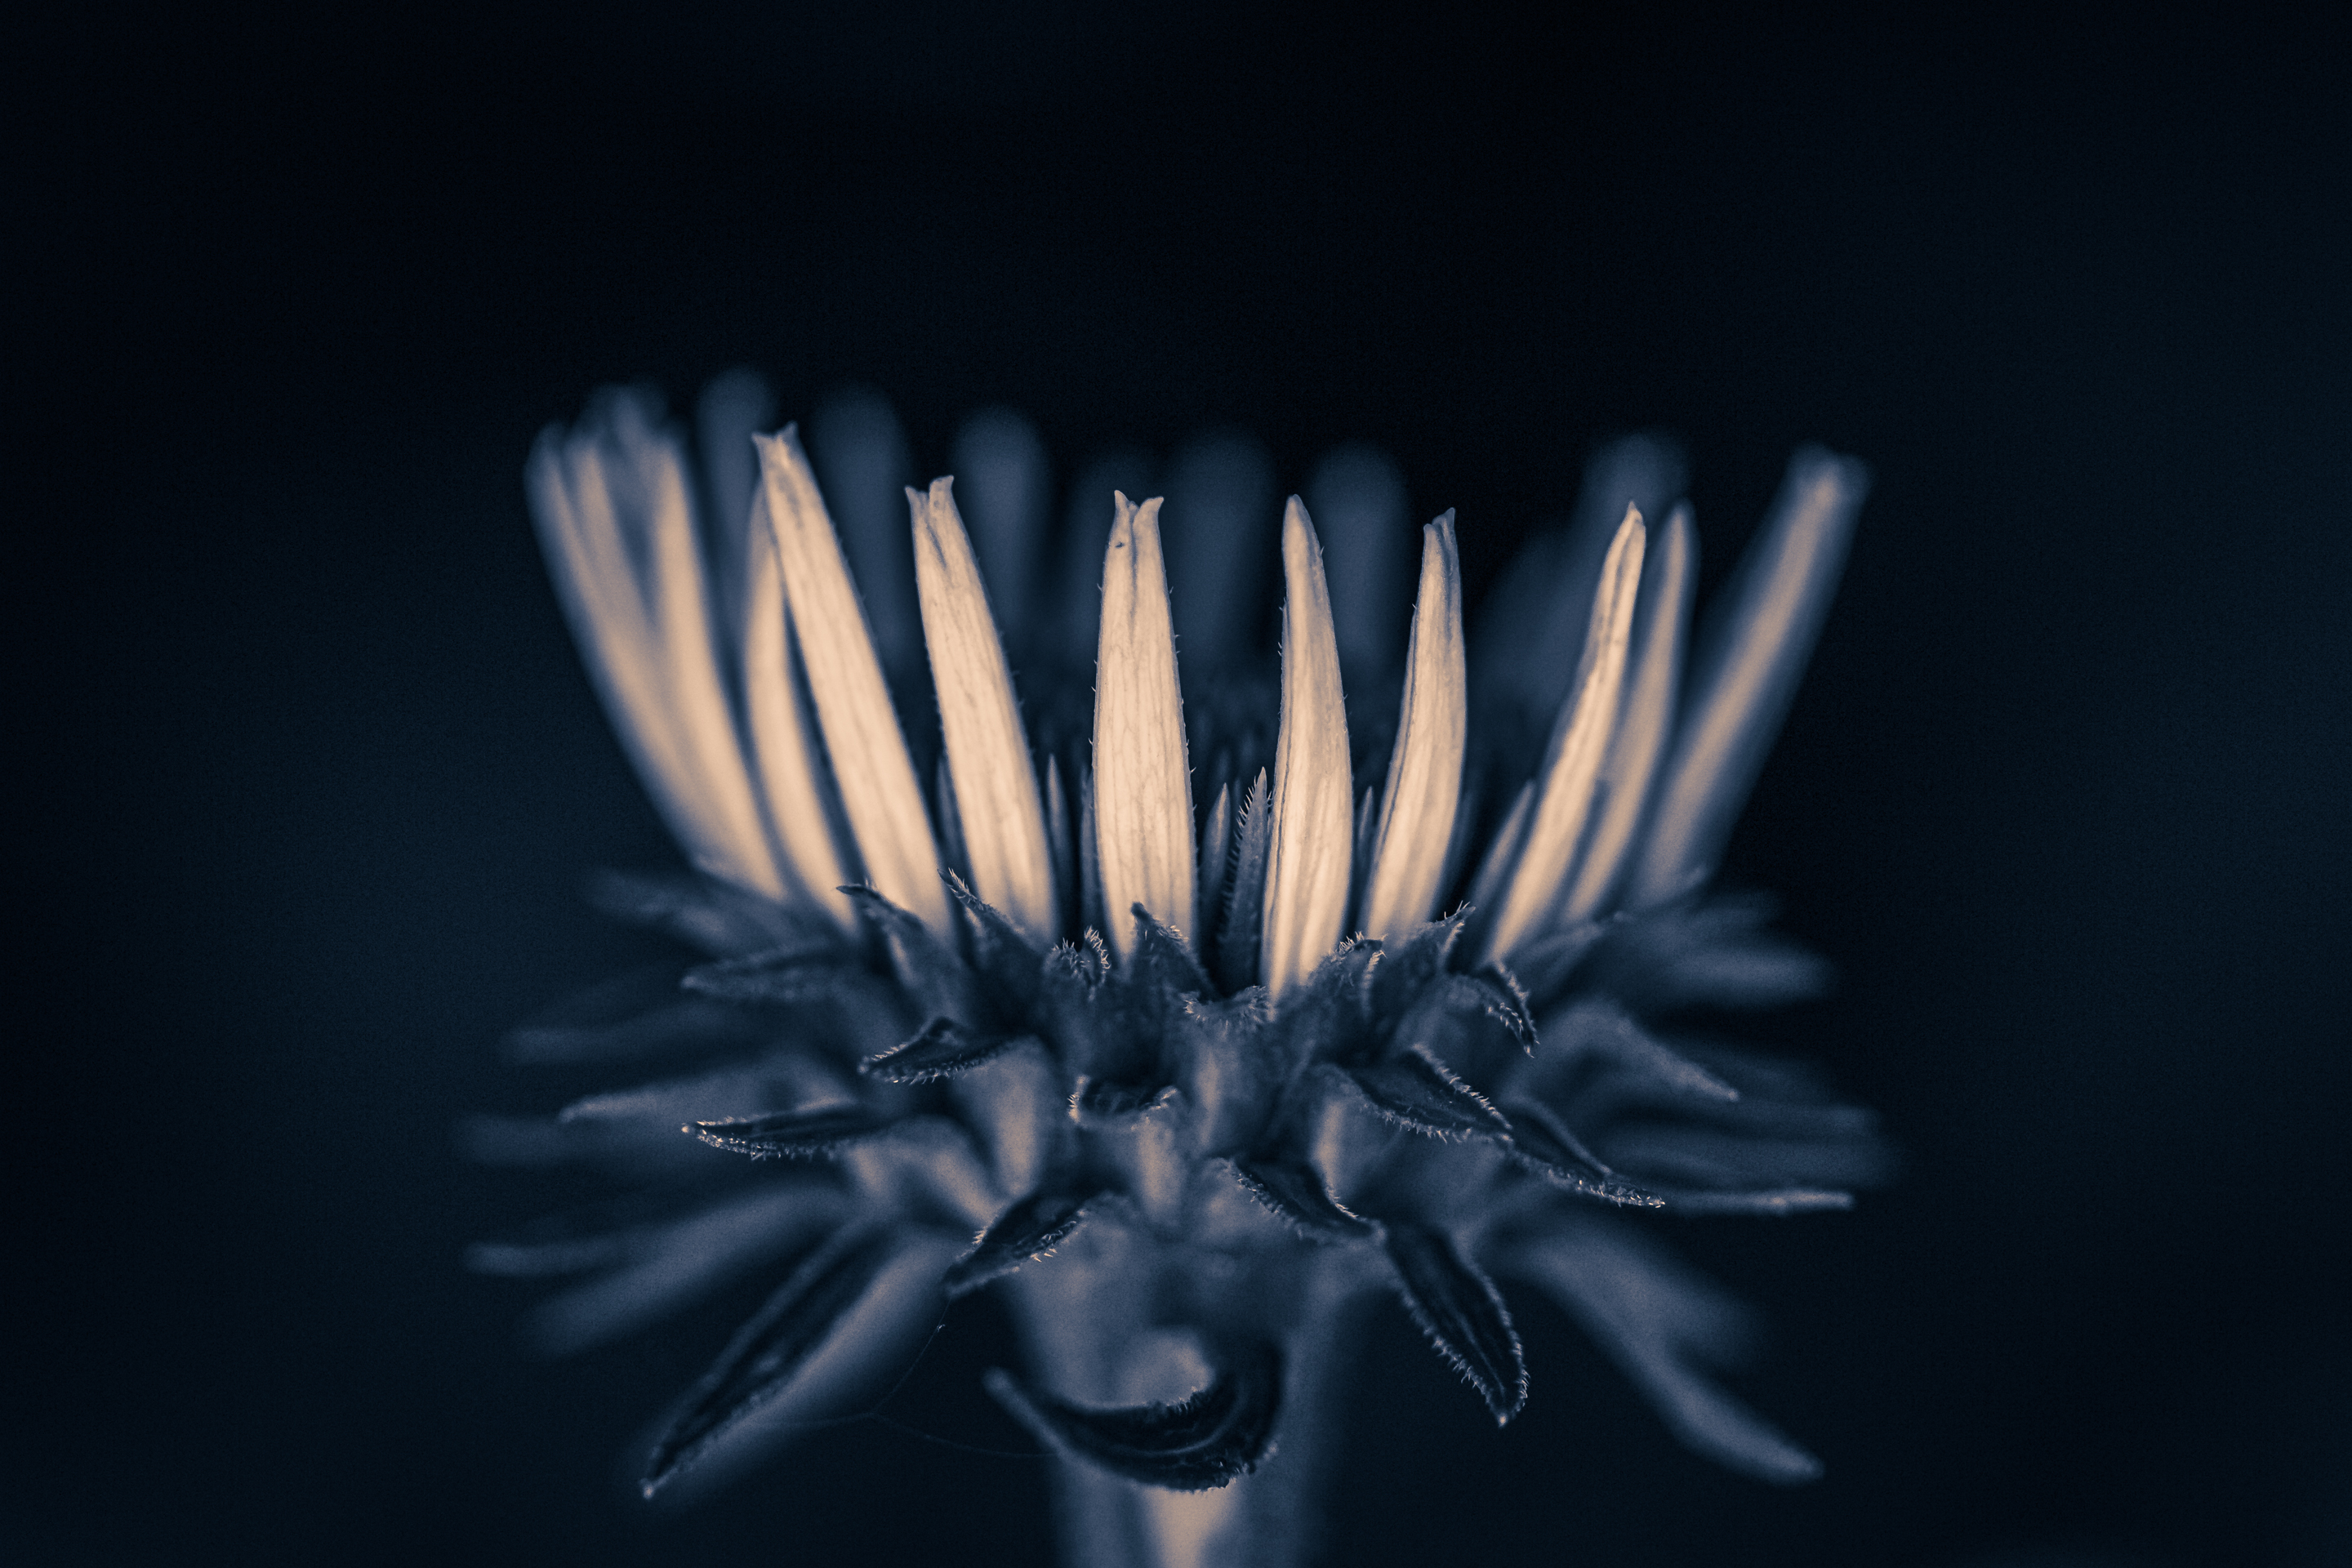 100mm macro photograph of one purple coneflower with its blossom forming a crown. Processed in a low key blue hued monochrome.